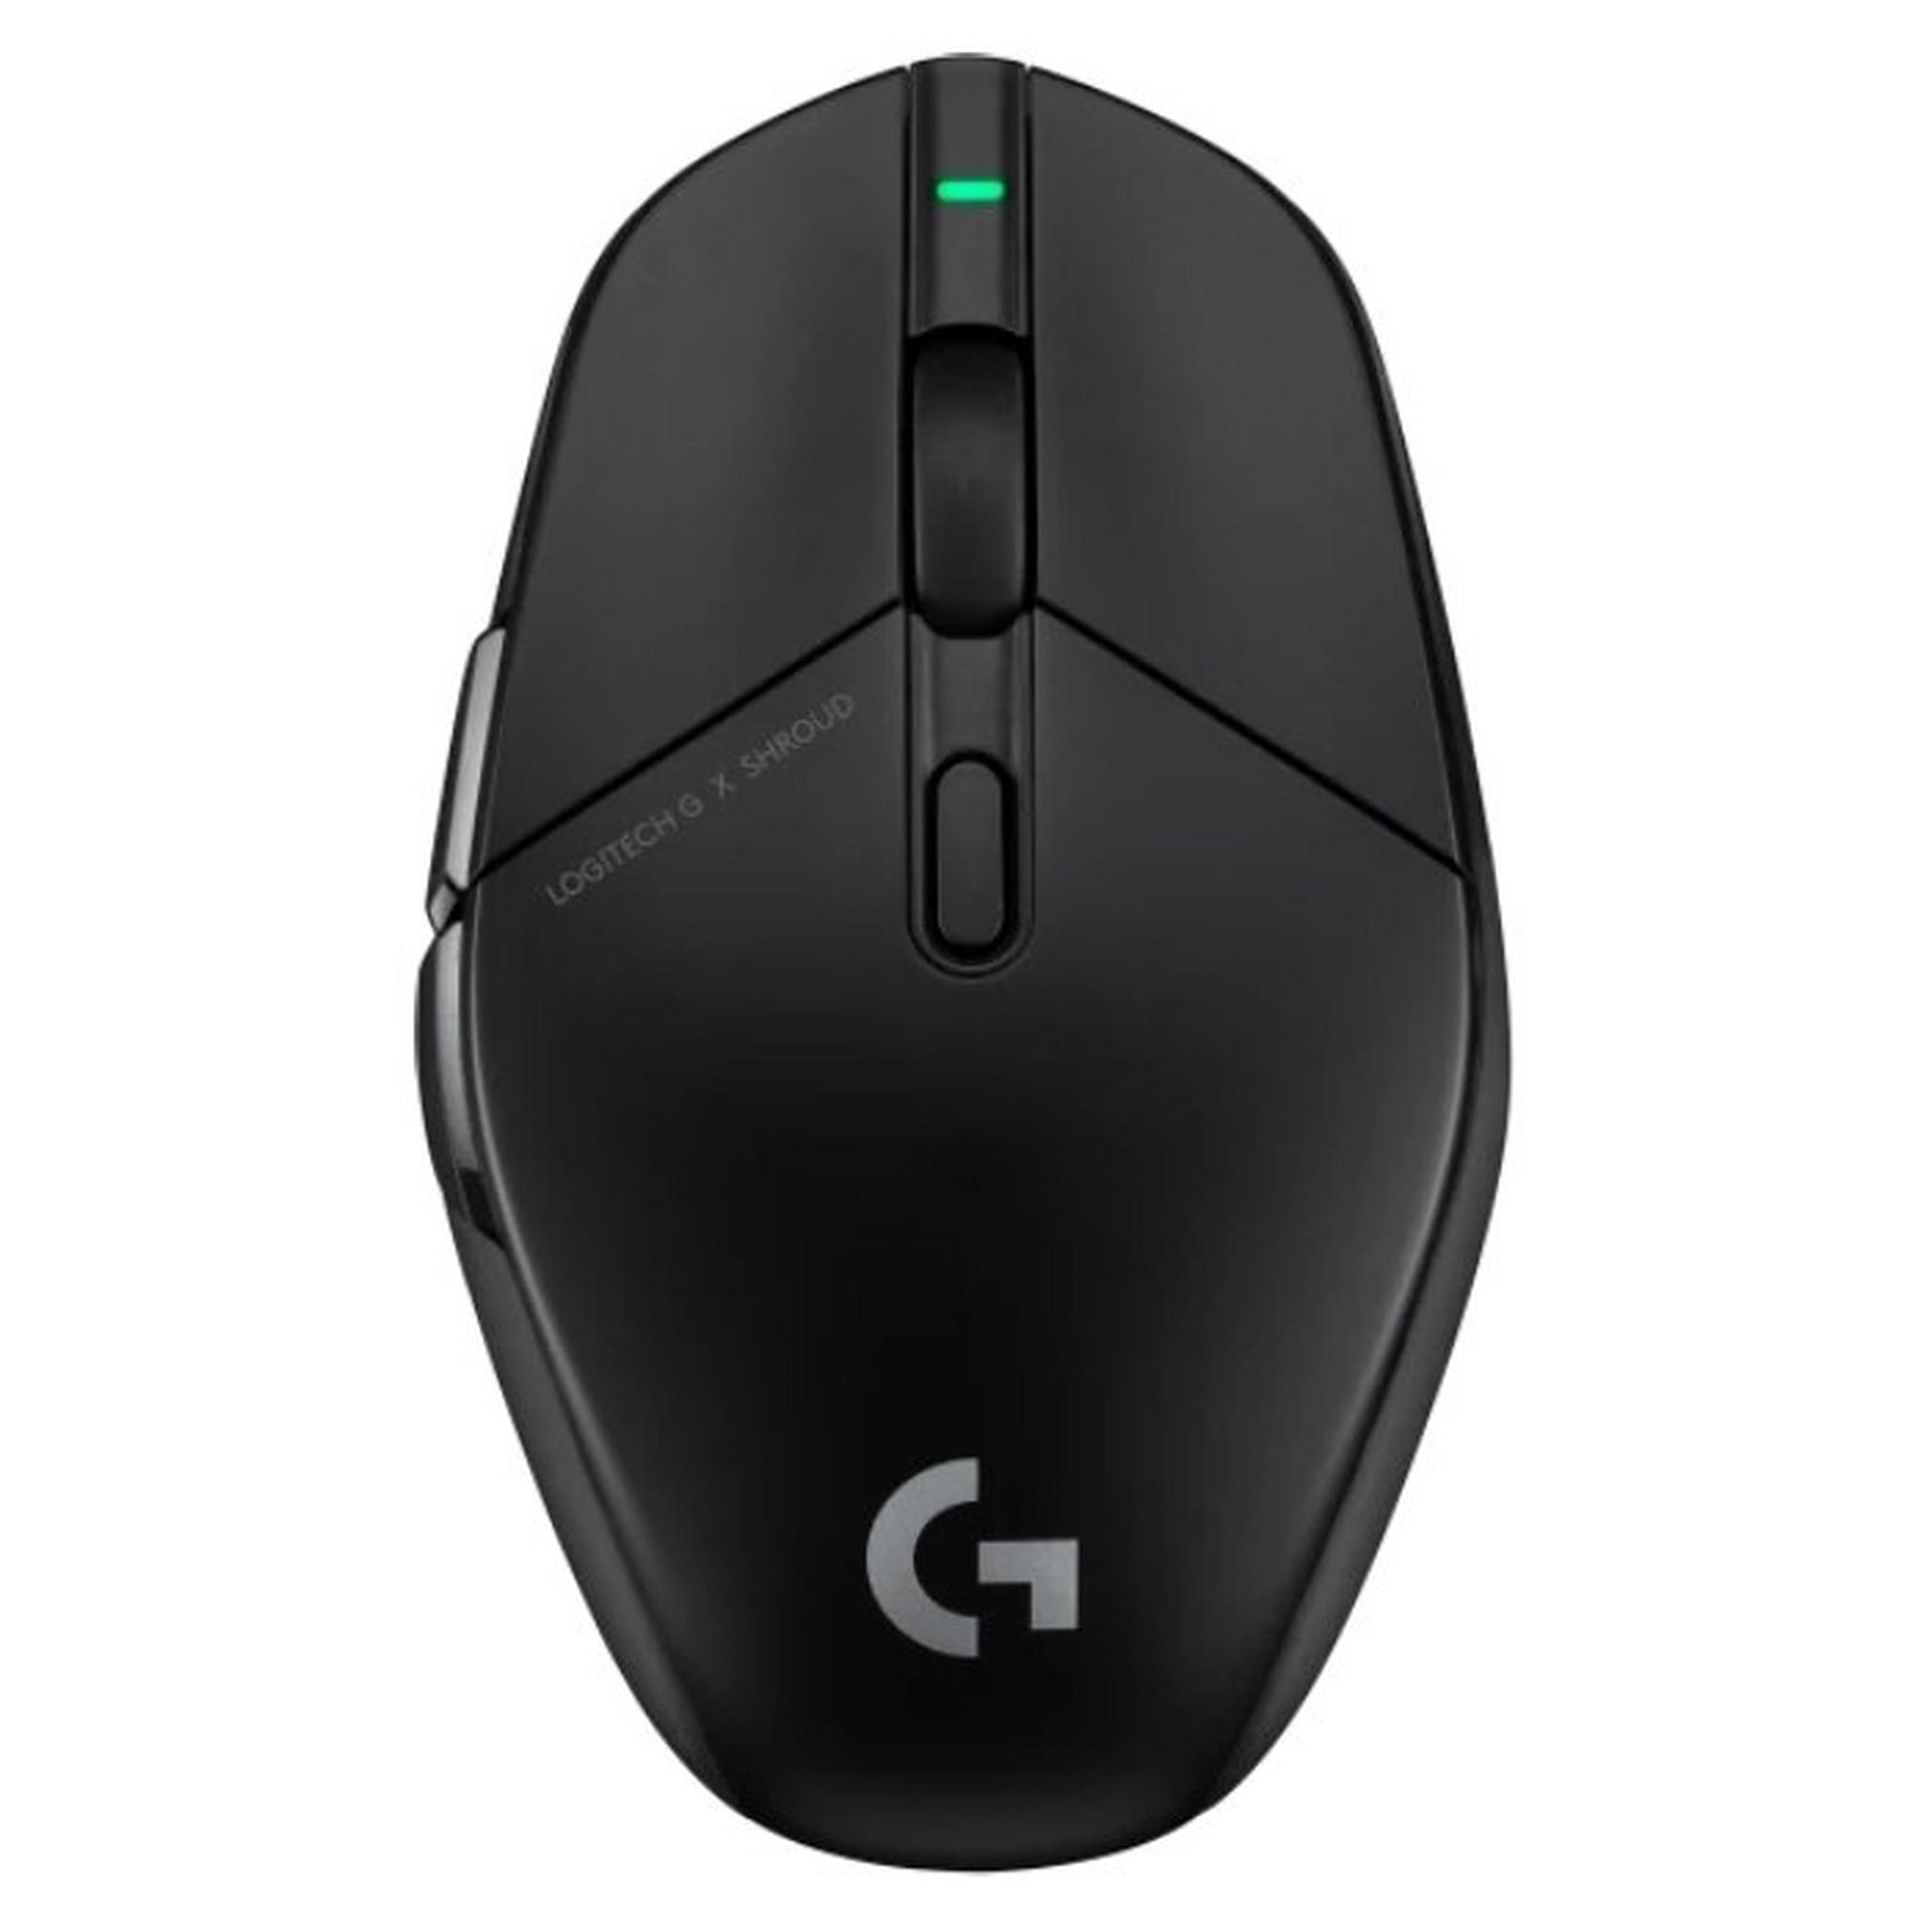 Logitech G303 Wireless Gaming Mouse - Shroud Edition